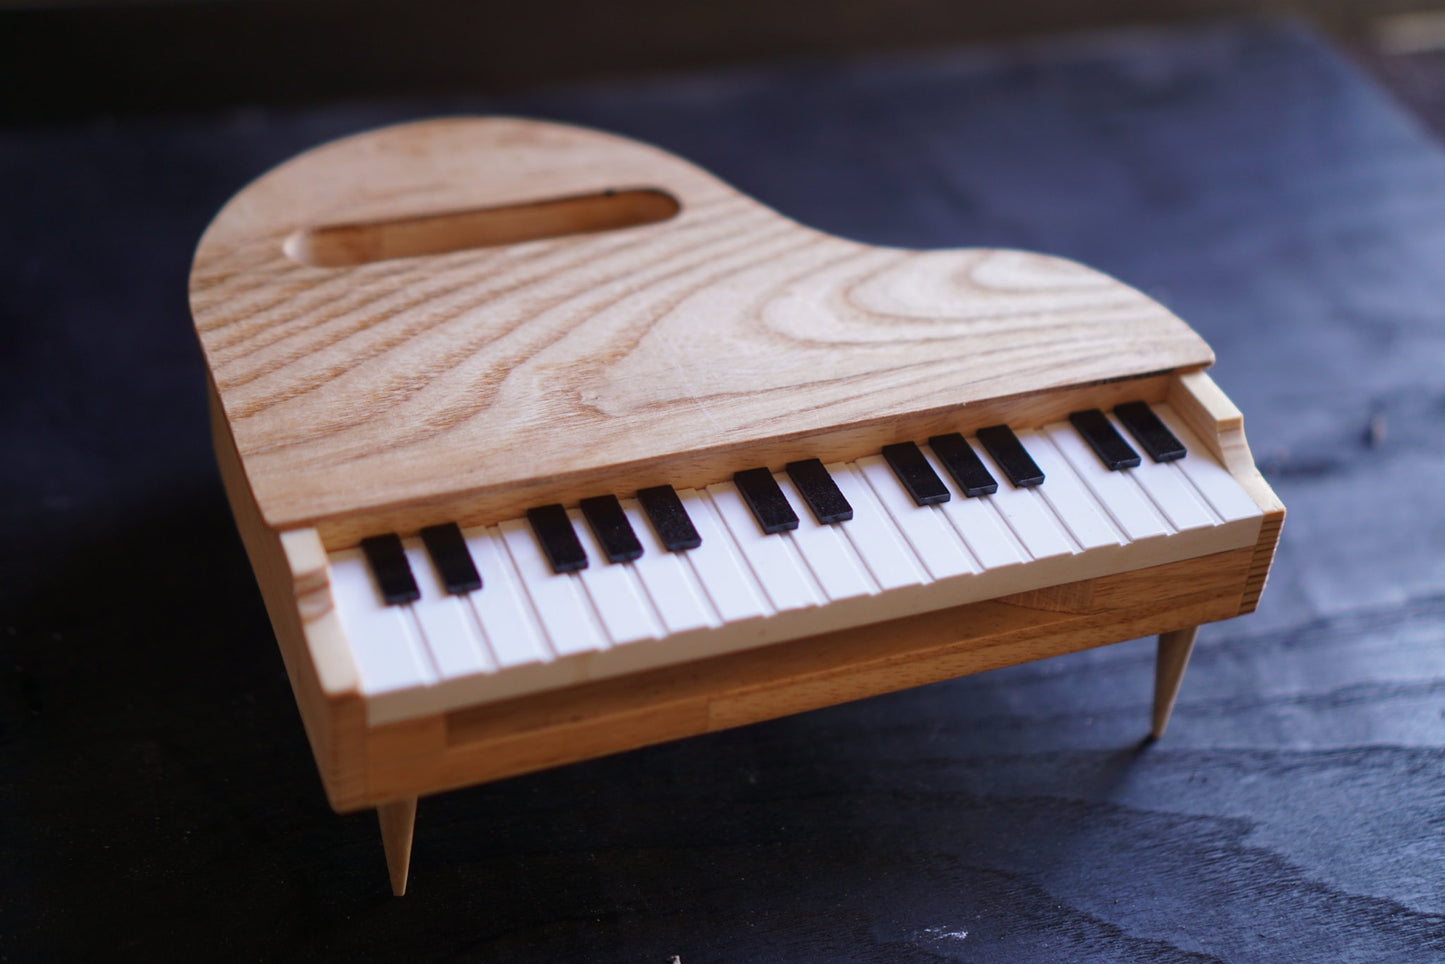 Wooden Piano mobile stand design file, printable template ,laser cut ,CNC - LoyocaWorkshop